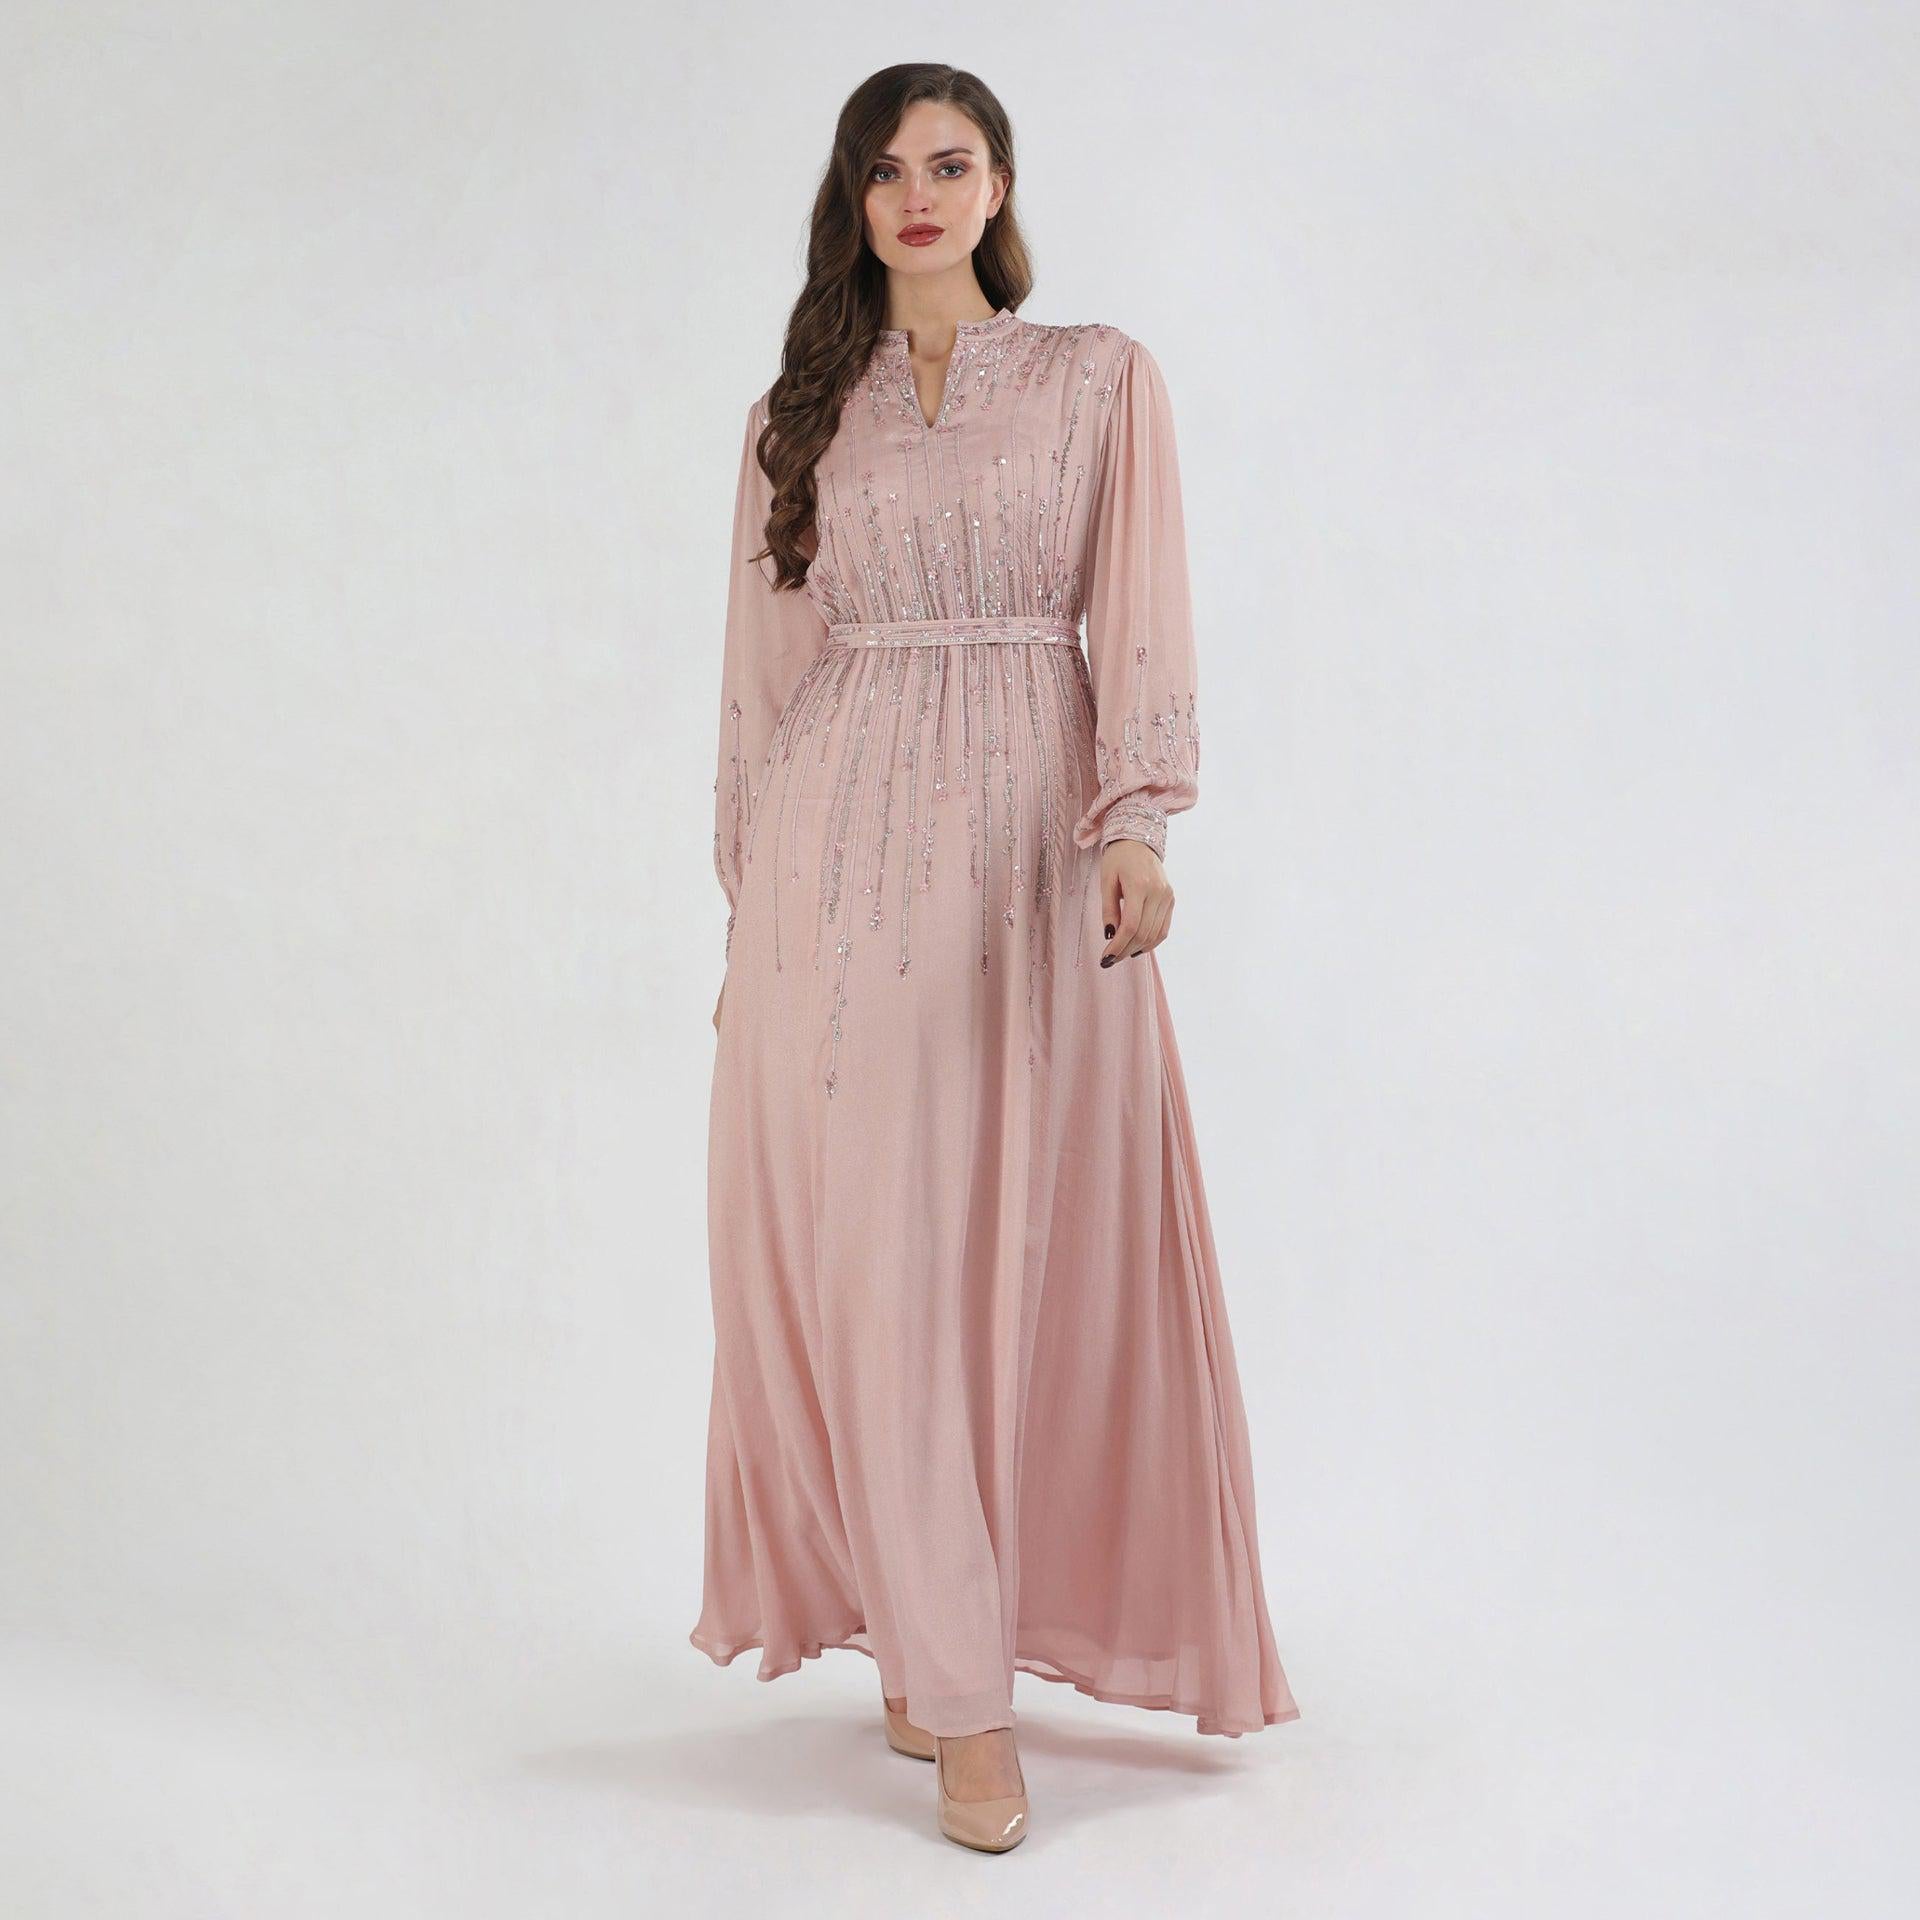 Pink Kalinga Dress With Long Sleeves And Silver Embroidery From Shalky